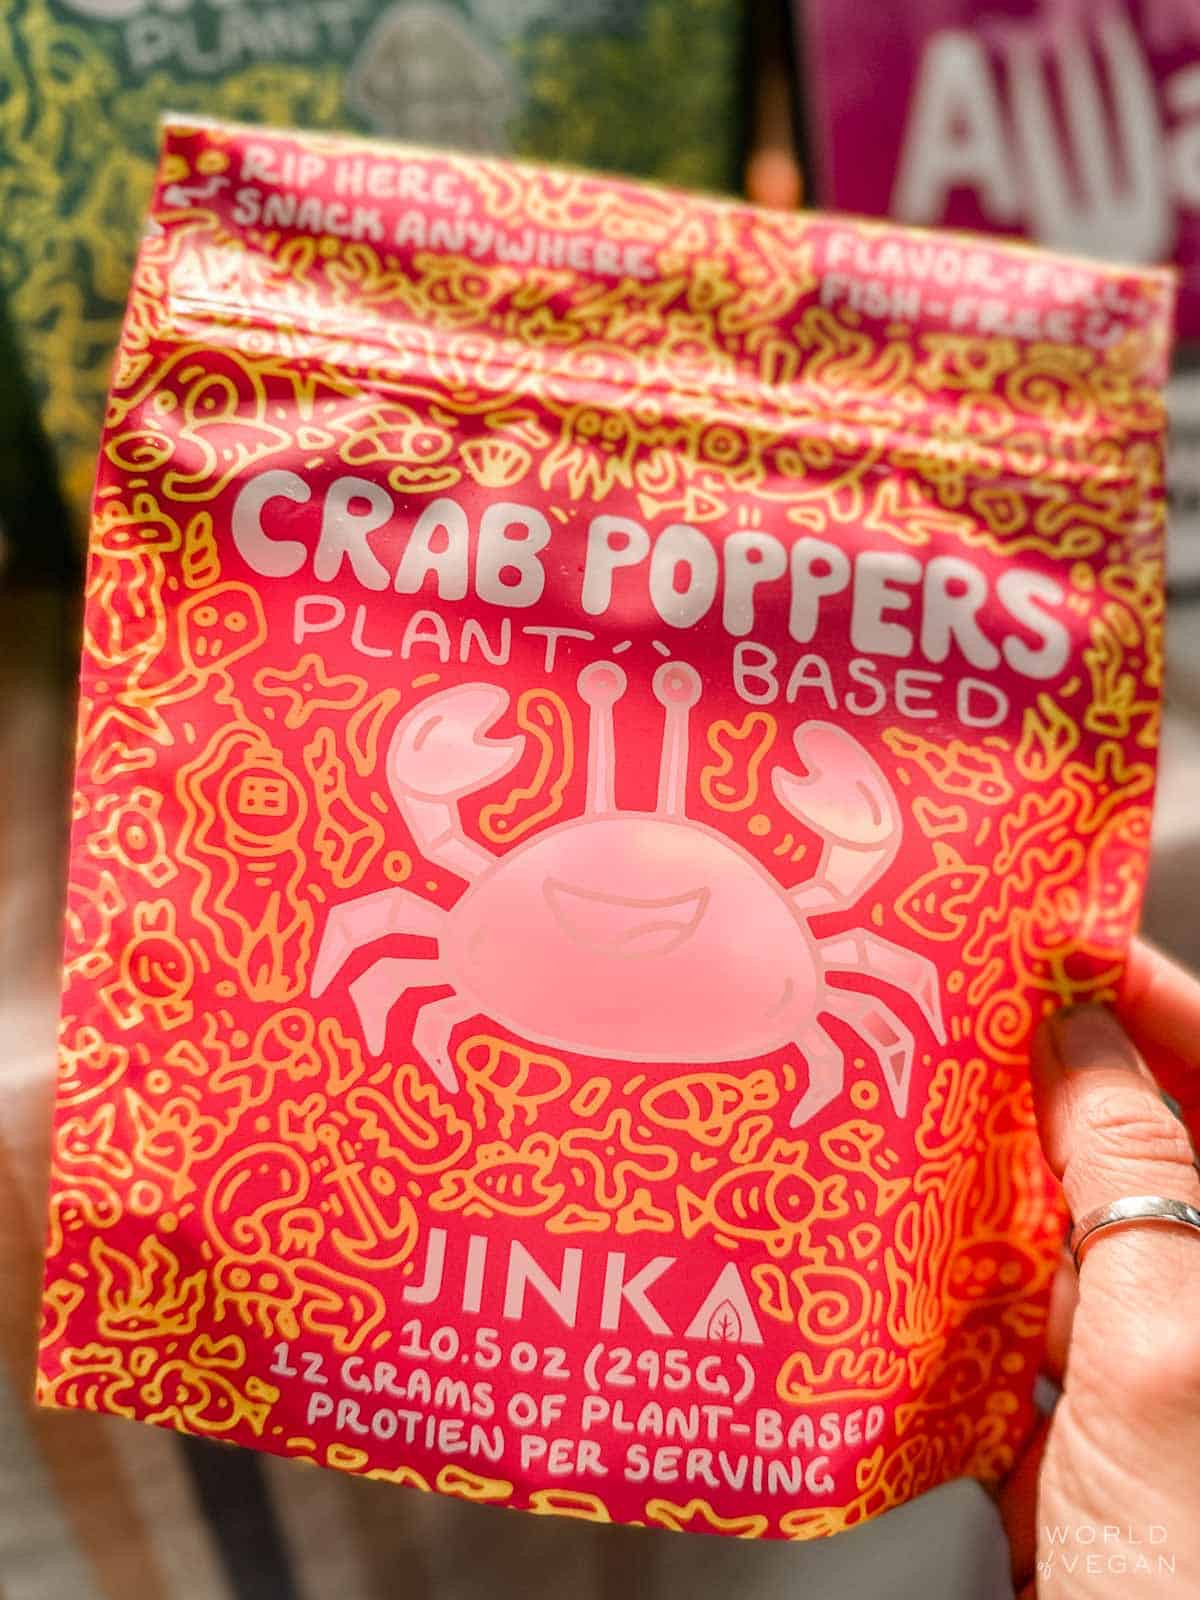 A package of Jinka brand plant-based crab poppers.